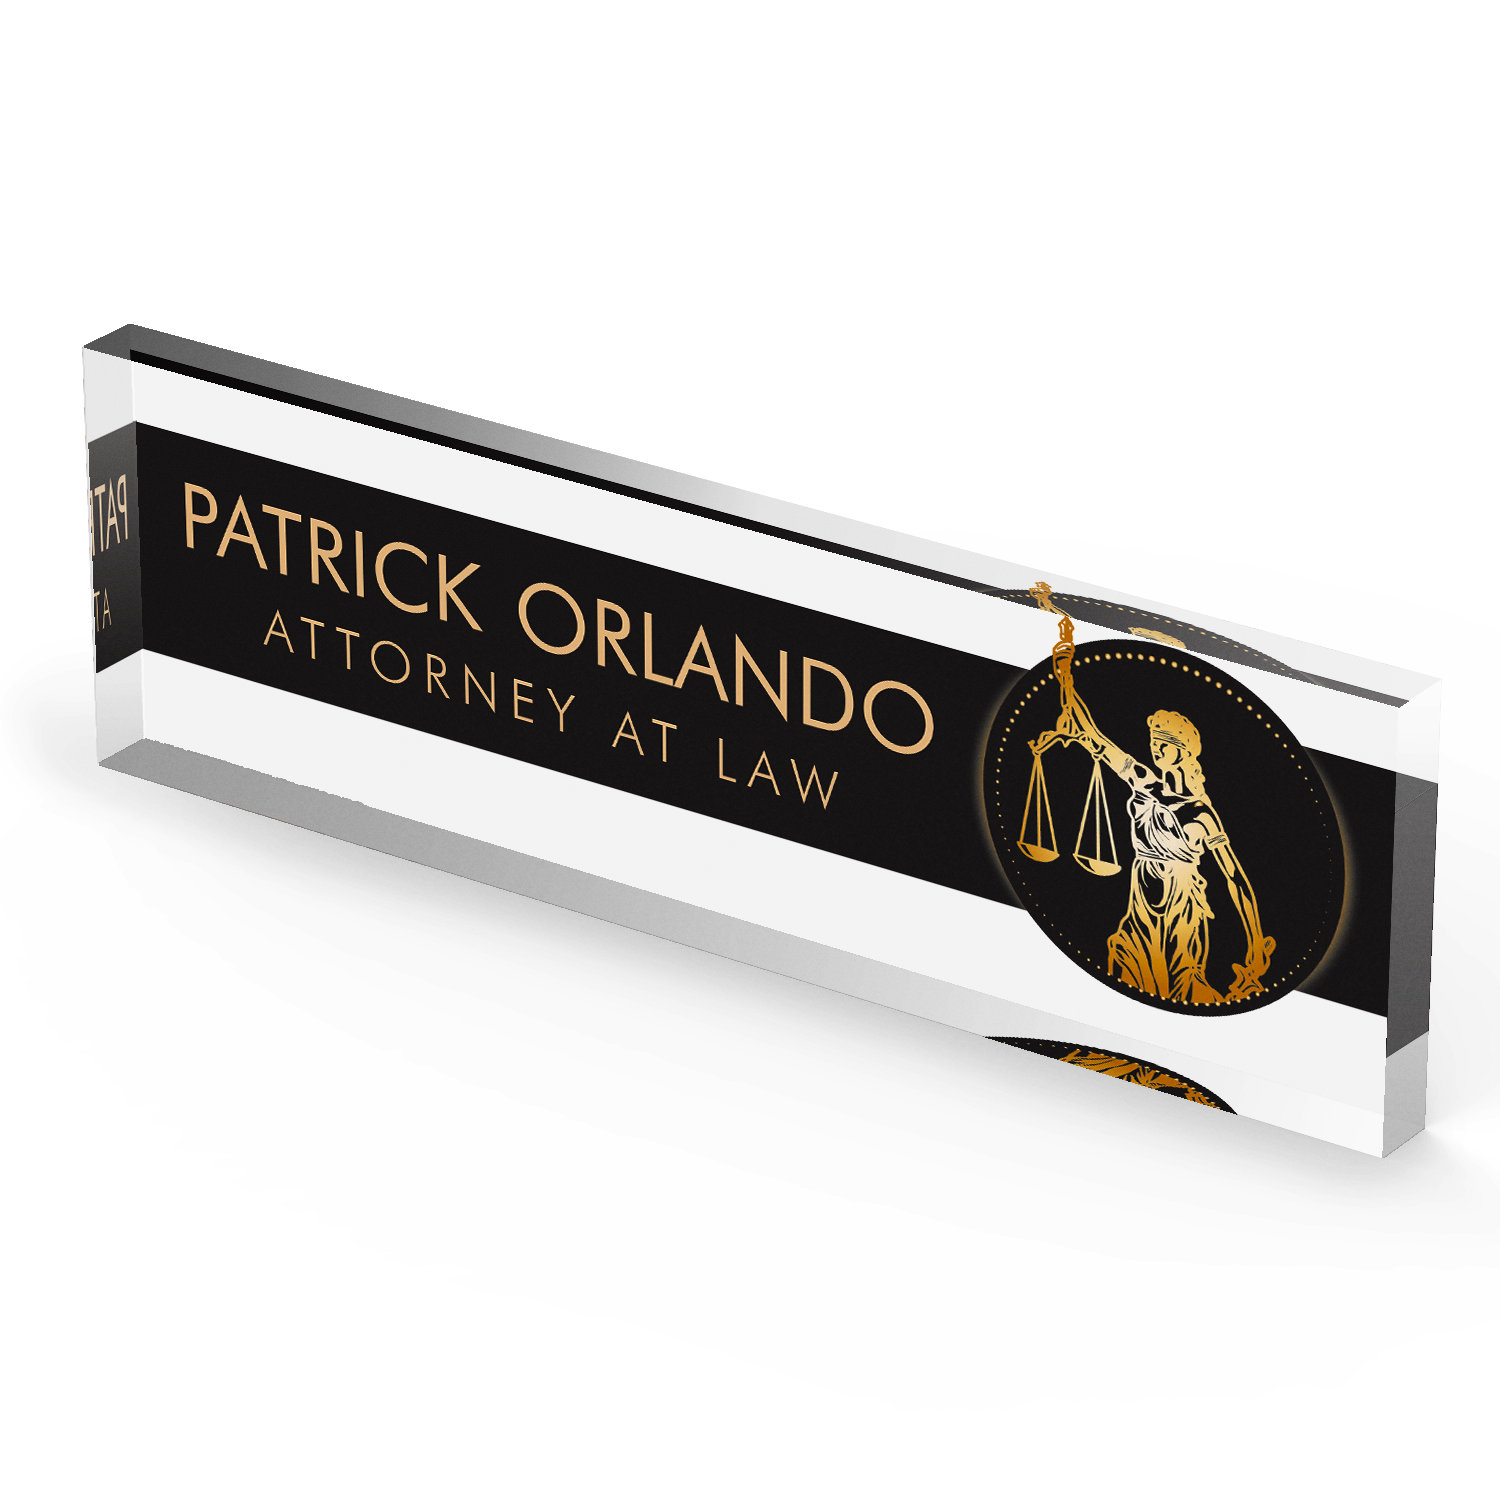 Artblox Personalized Name Plates for Doors | Custom Office Door Signs |  Lawyer Door Name Plate on Thick Clear Cast Acrylic Glass